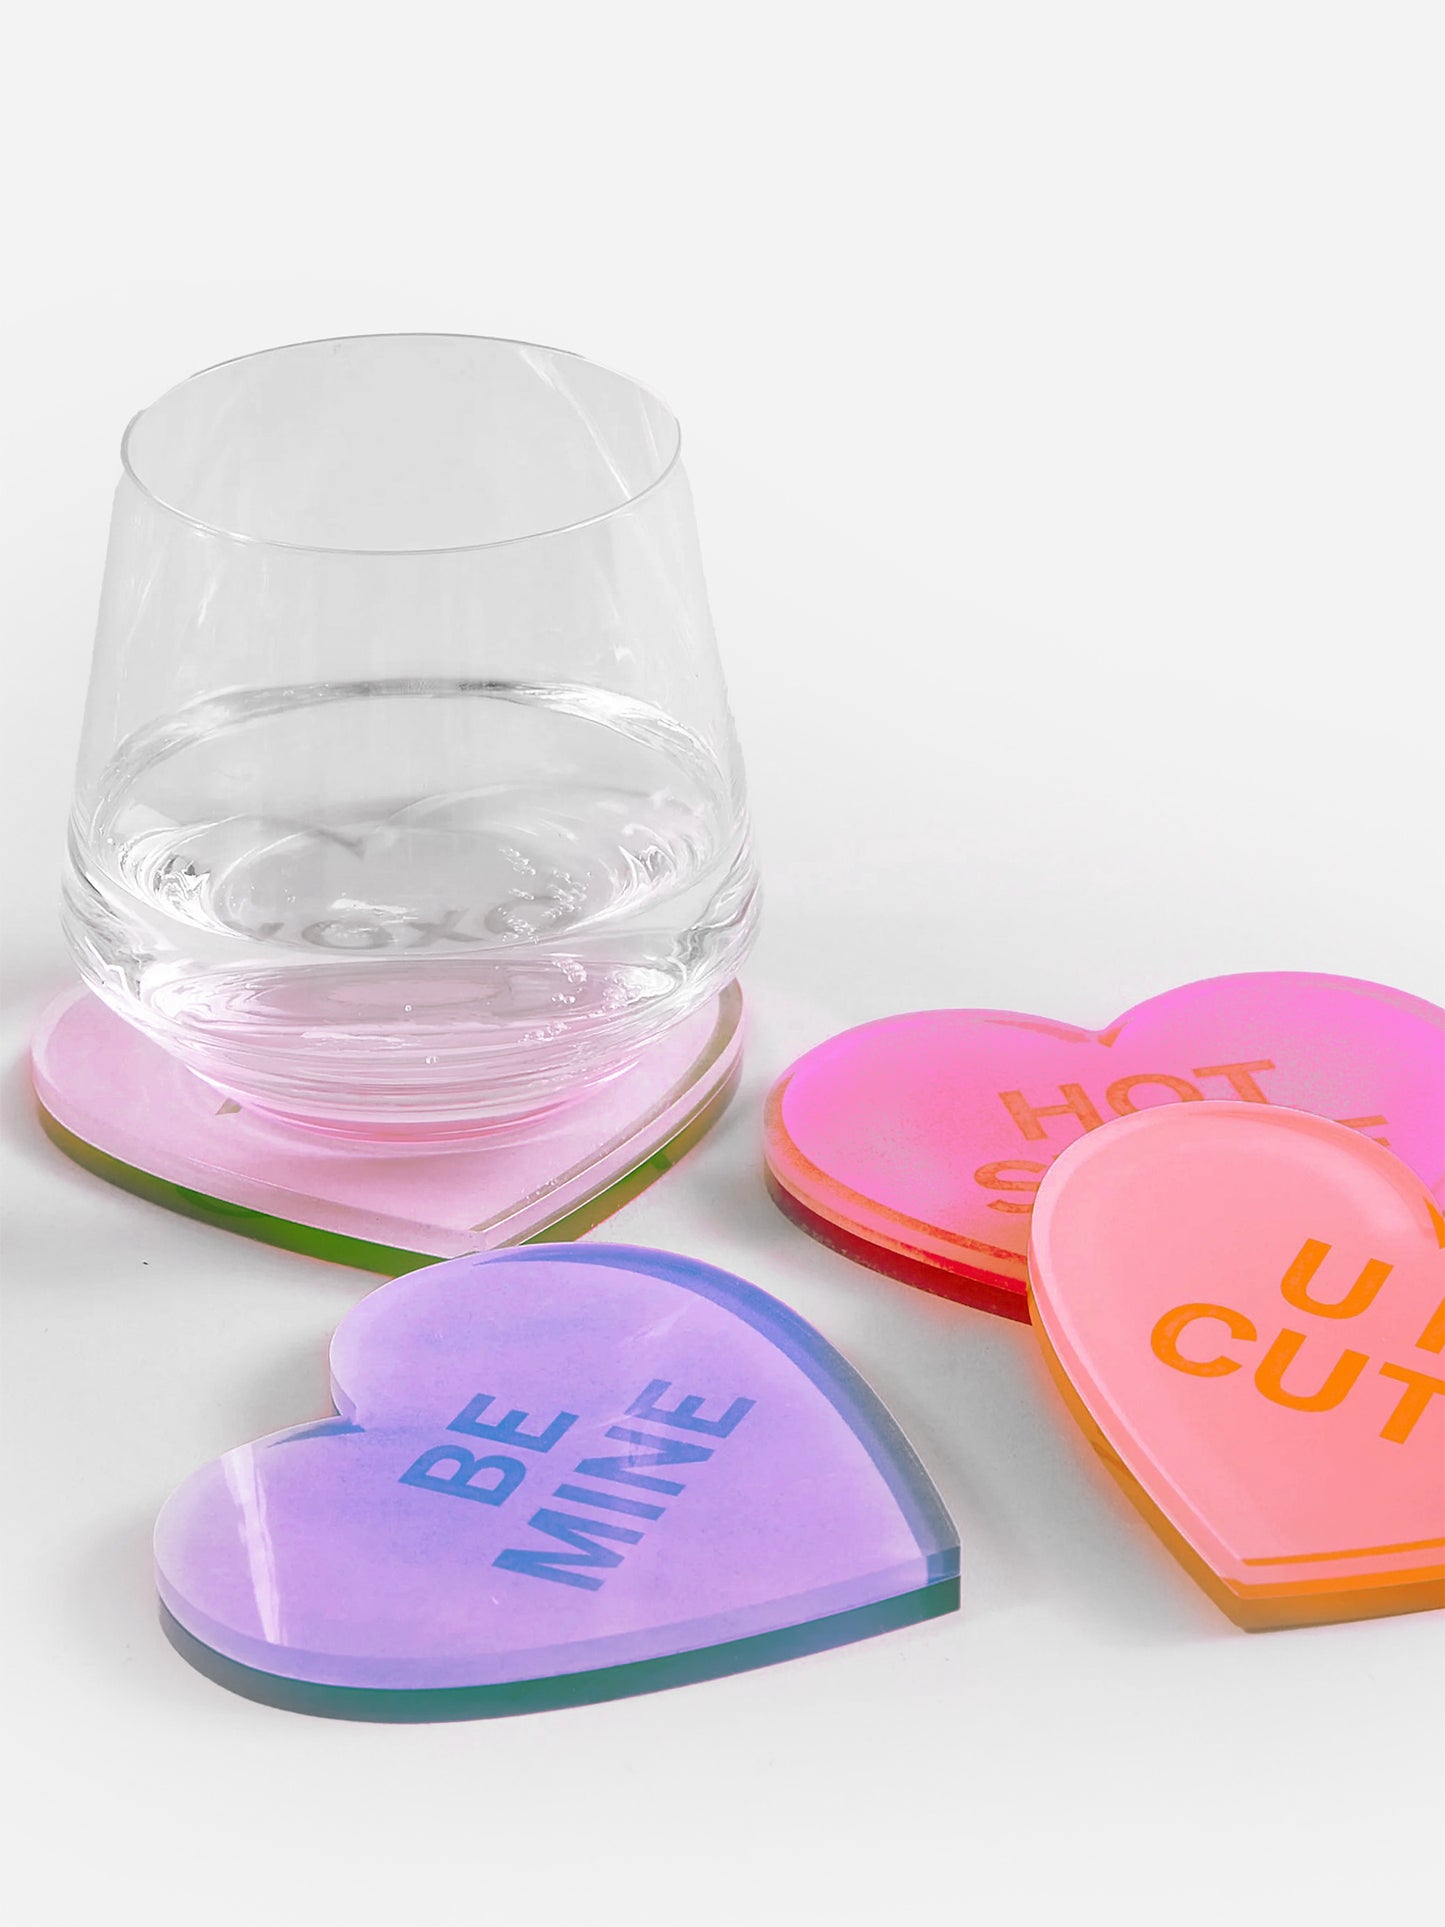 Tart By Taylor Conversation Hearts Set of 4 Coasters